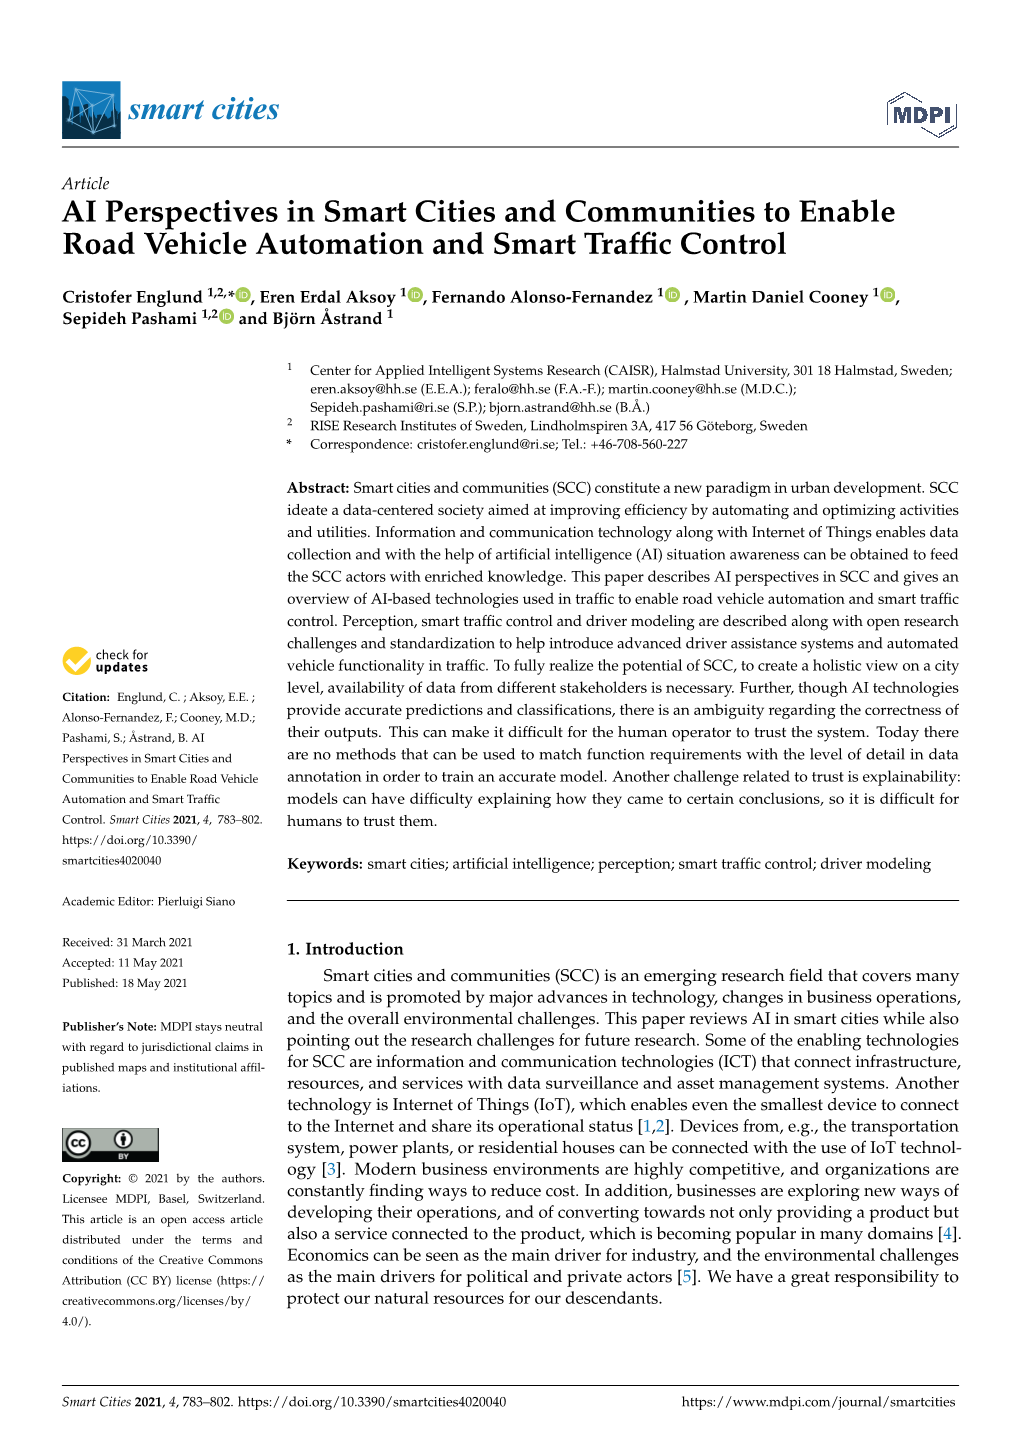 AI Perspectives in Smart Cities and Communities to Enable Road Vehicle Automation and Smart Trafﬁc Control